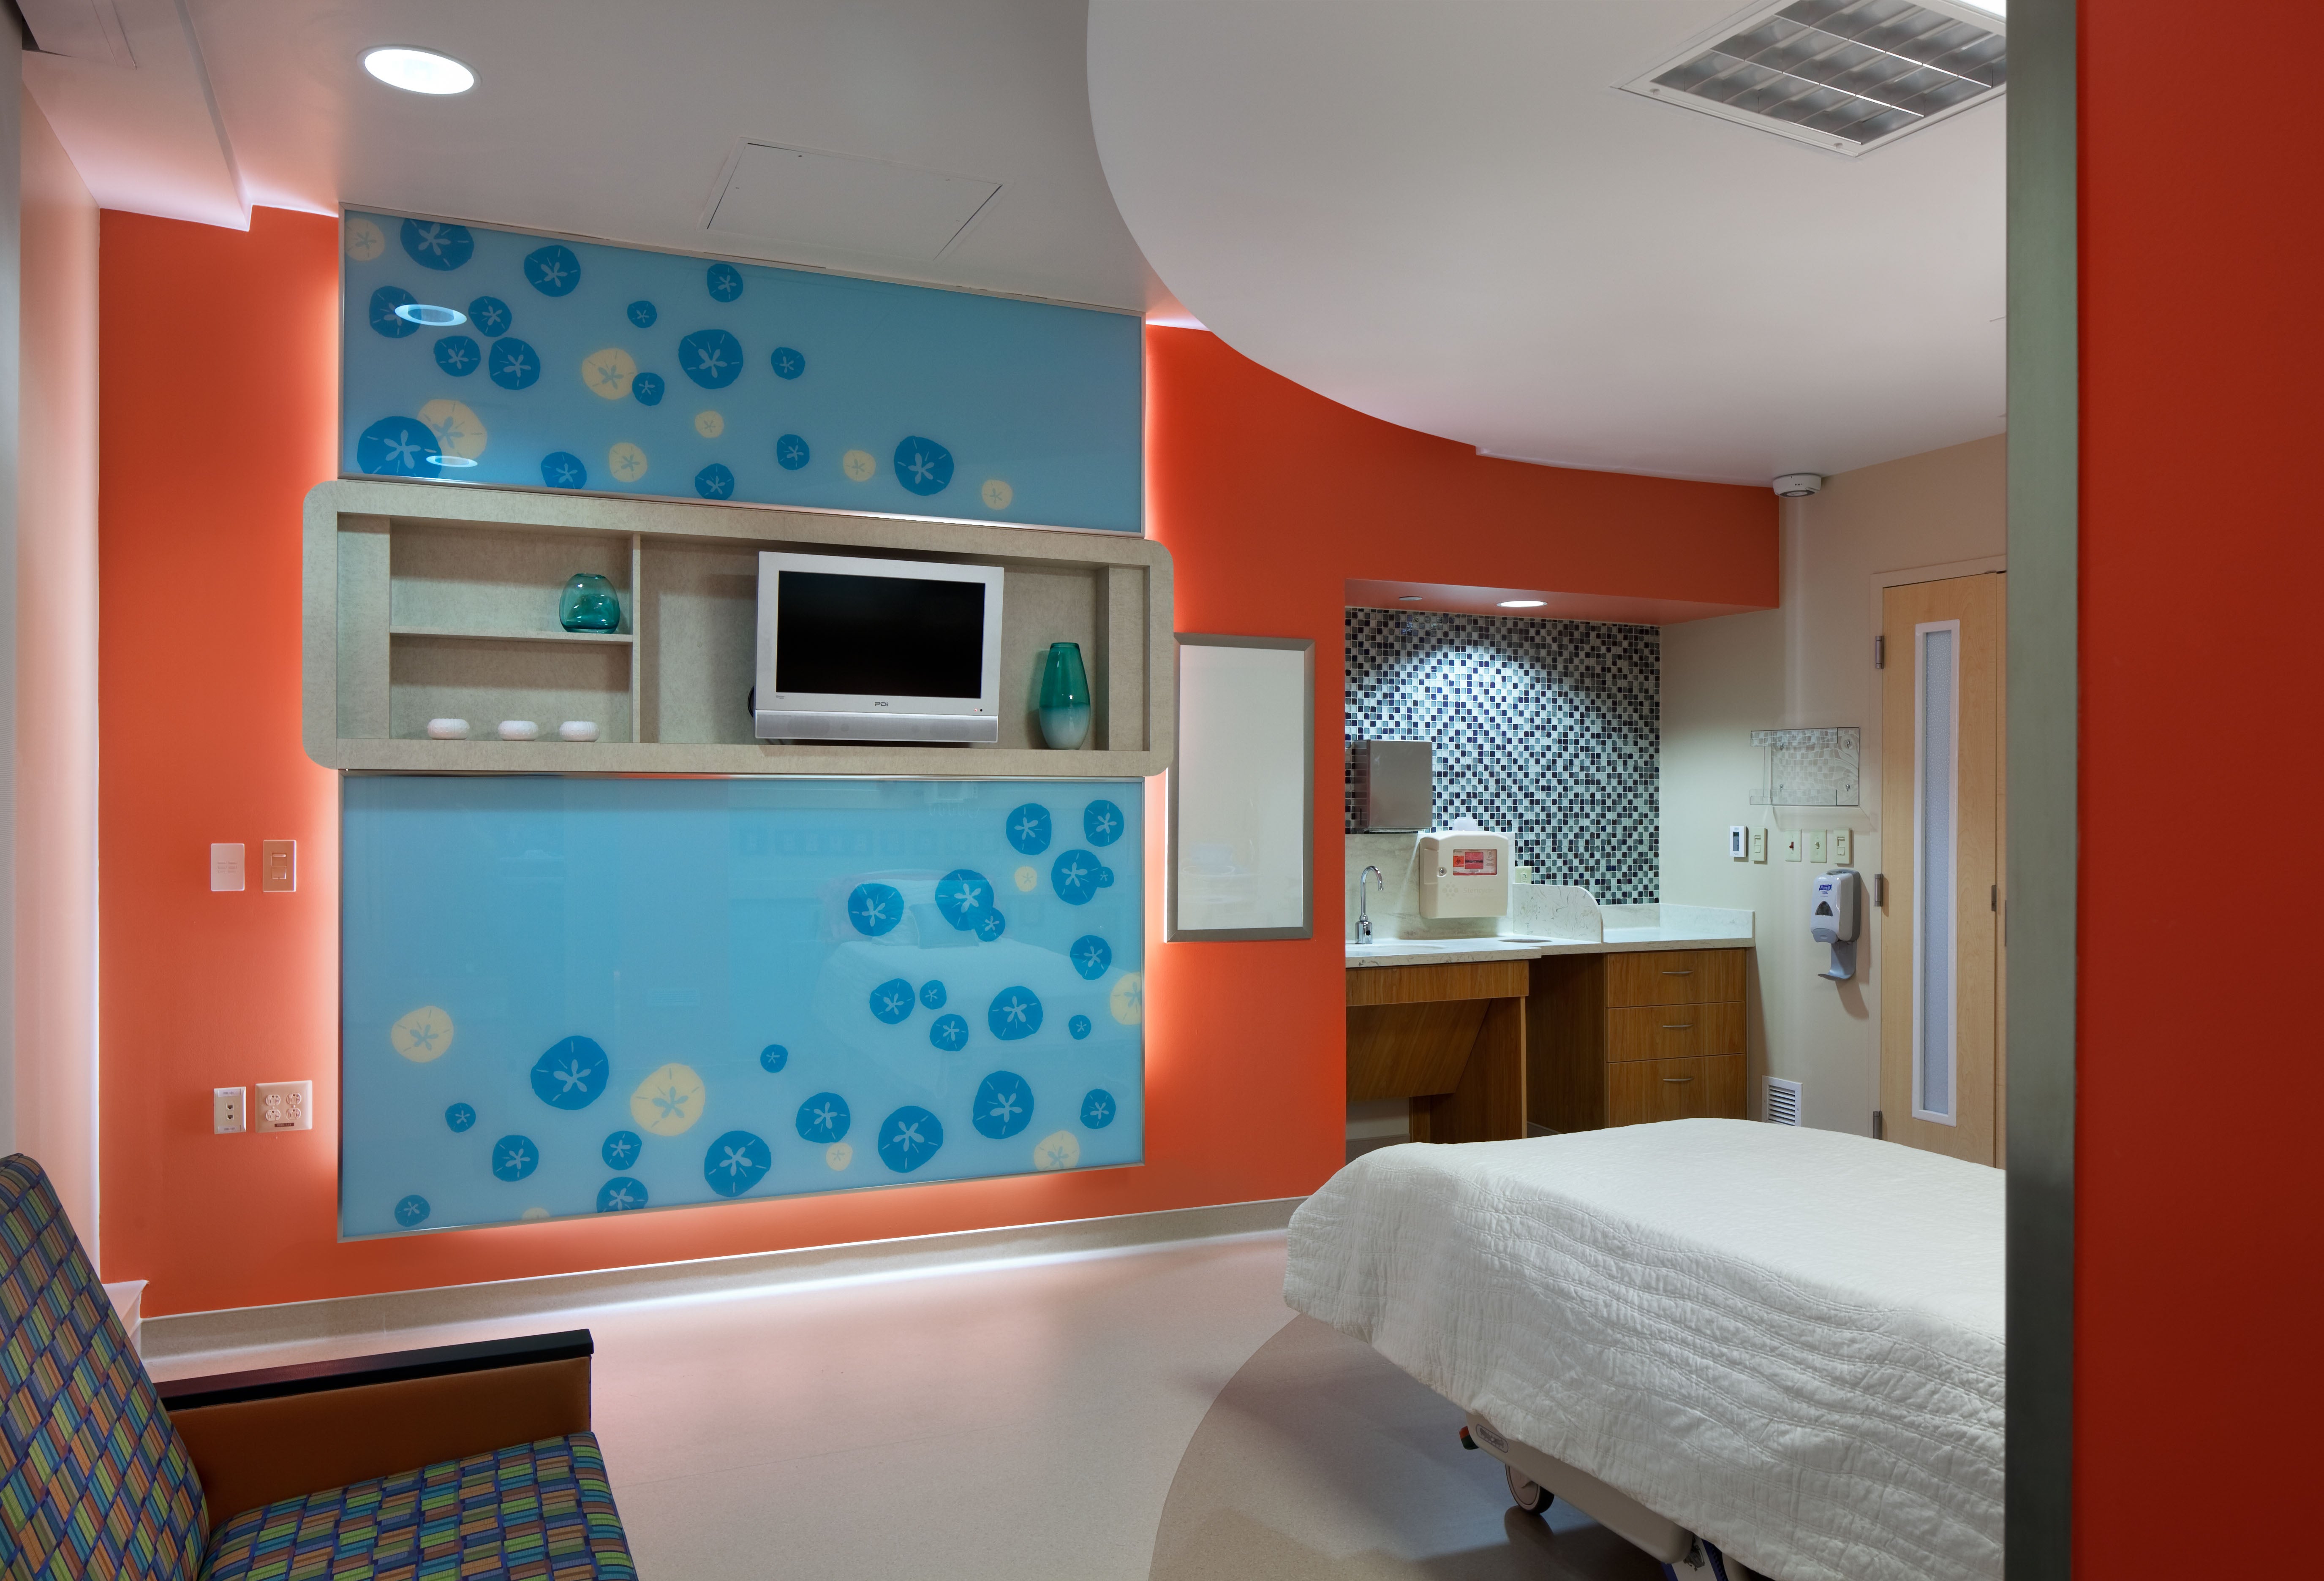 design-strategies-for-pediatric-spaces-footwall-embed